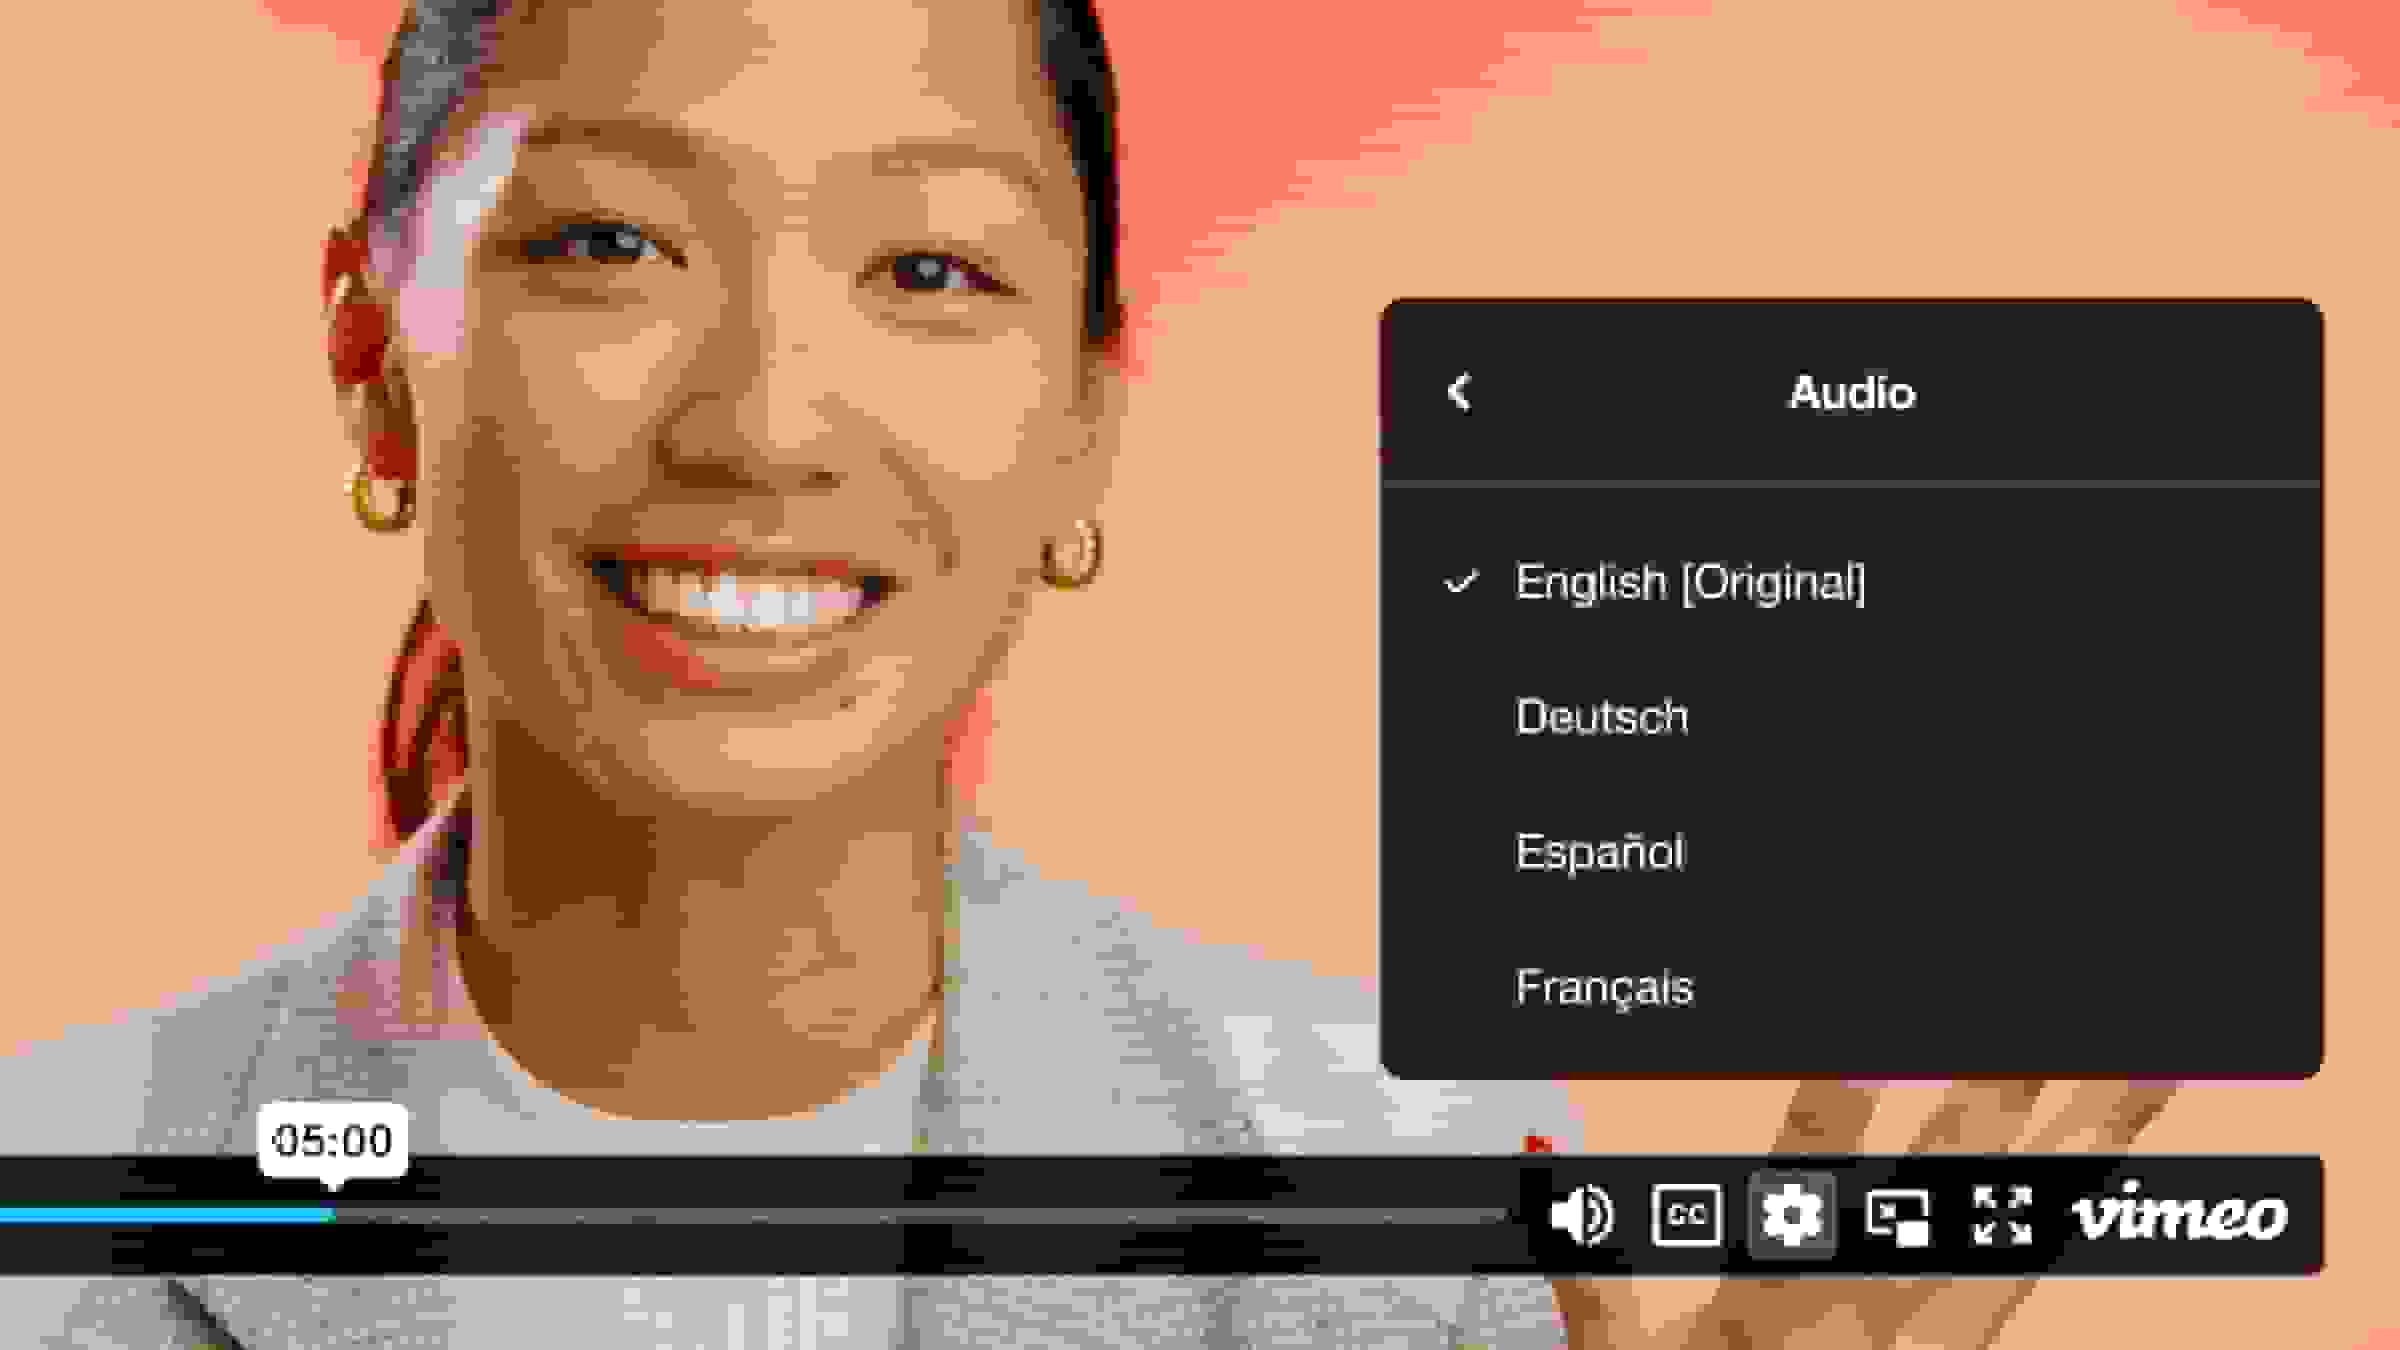 Add audio to video of a smiling woman, with a choice between different language audio such as English and Spanish.